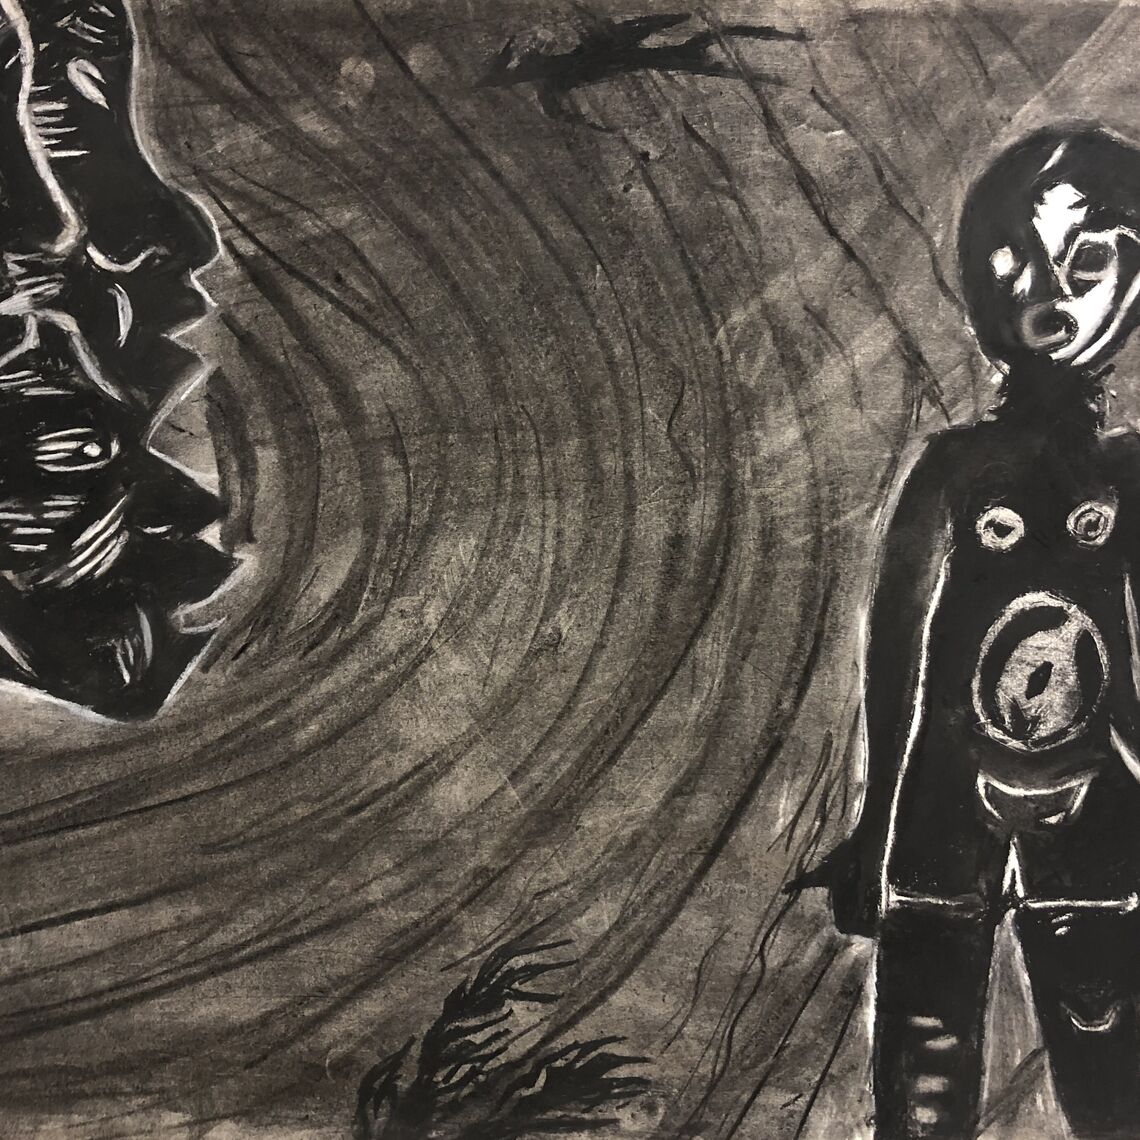 Charcoal illustrations by Jevelson Jean '21